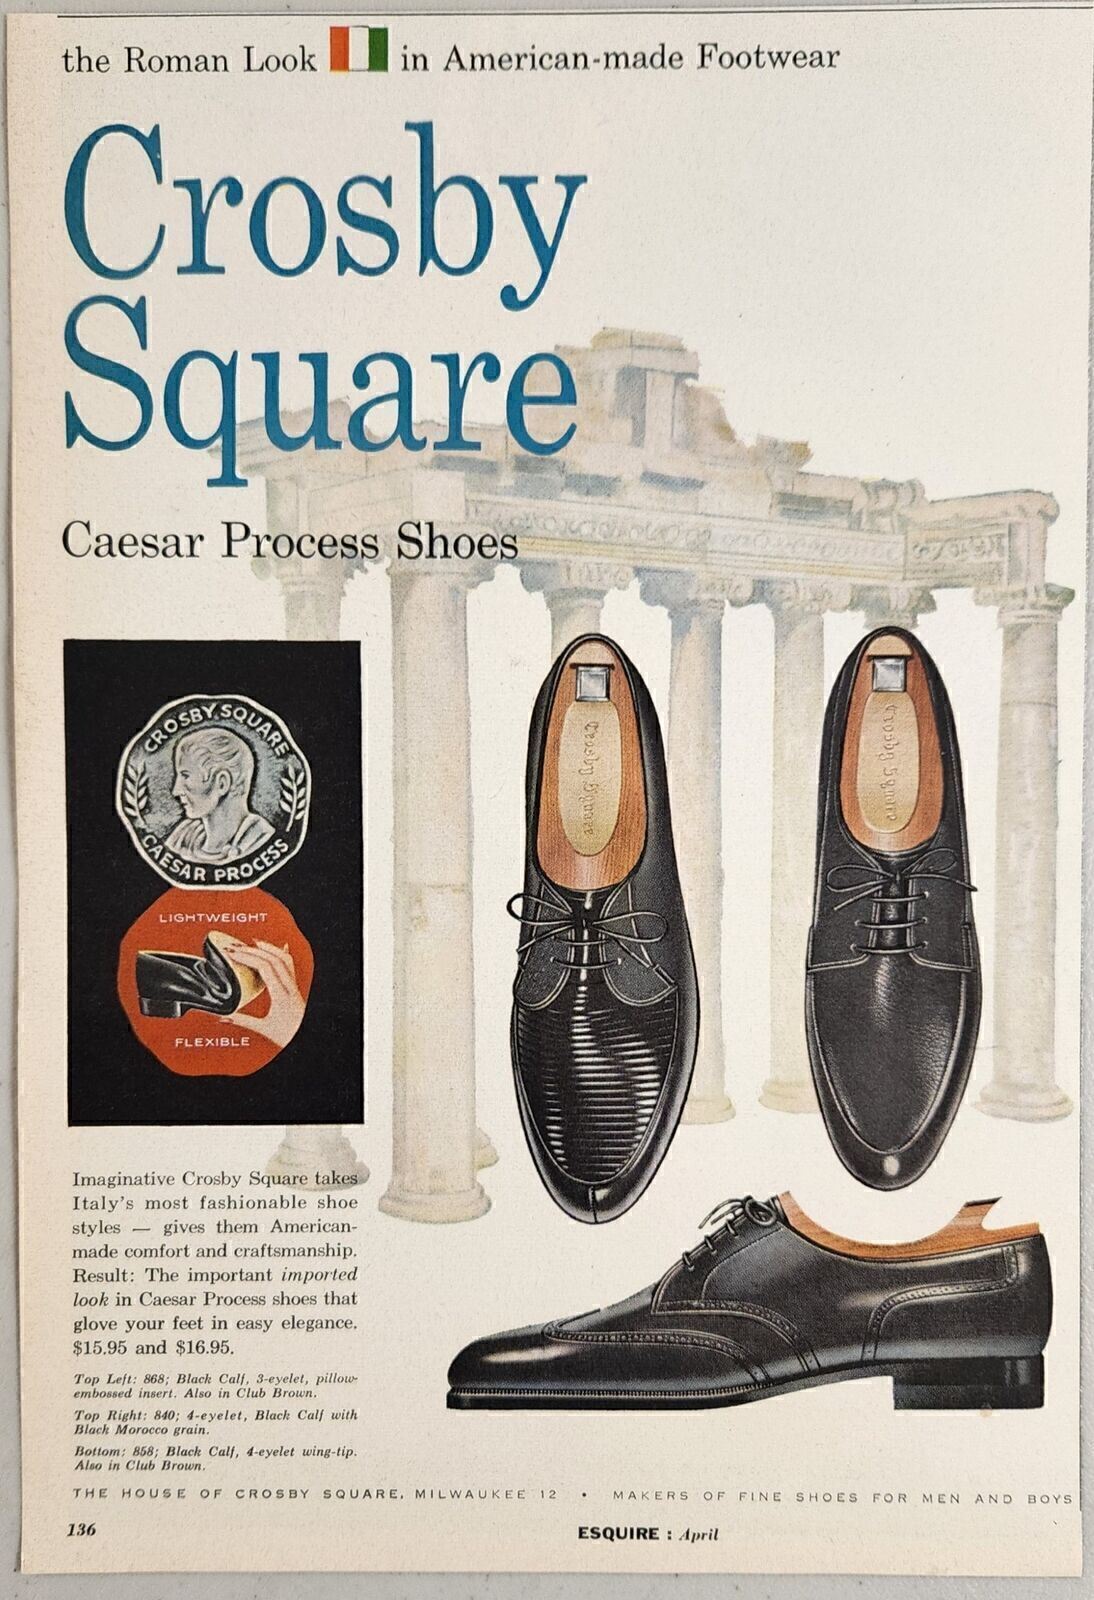 1959 Print Ad Crosby Square Caesar Process Shoes for Men Milwaukee,Wisconsin